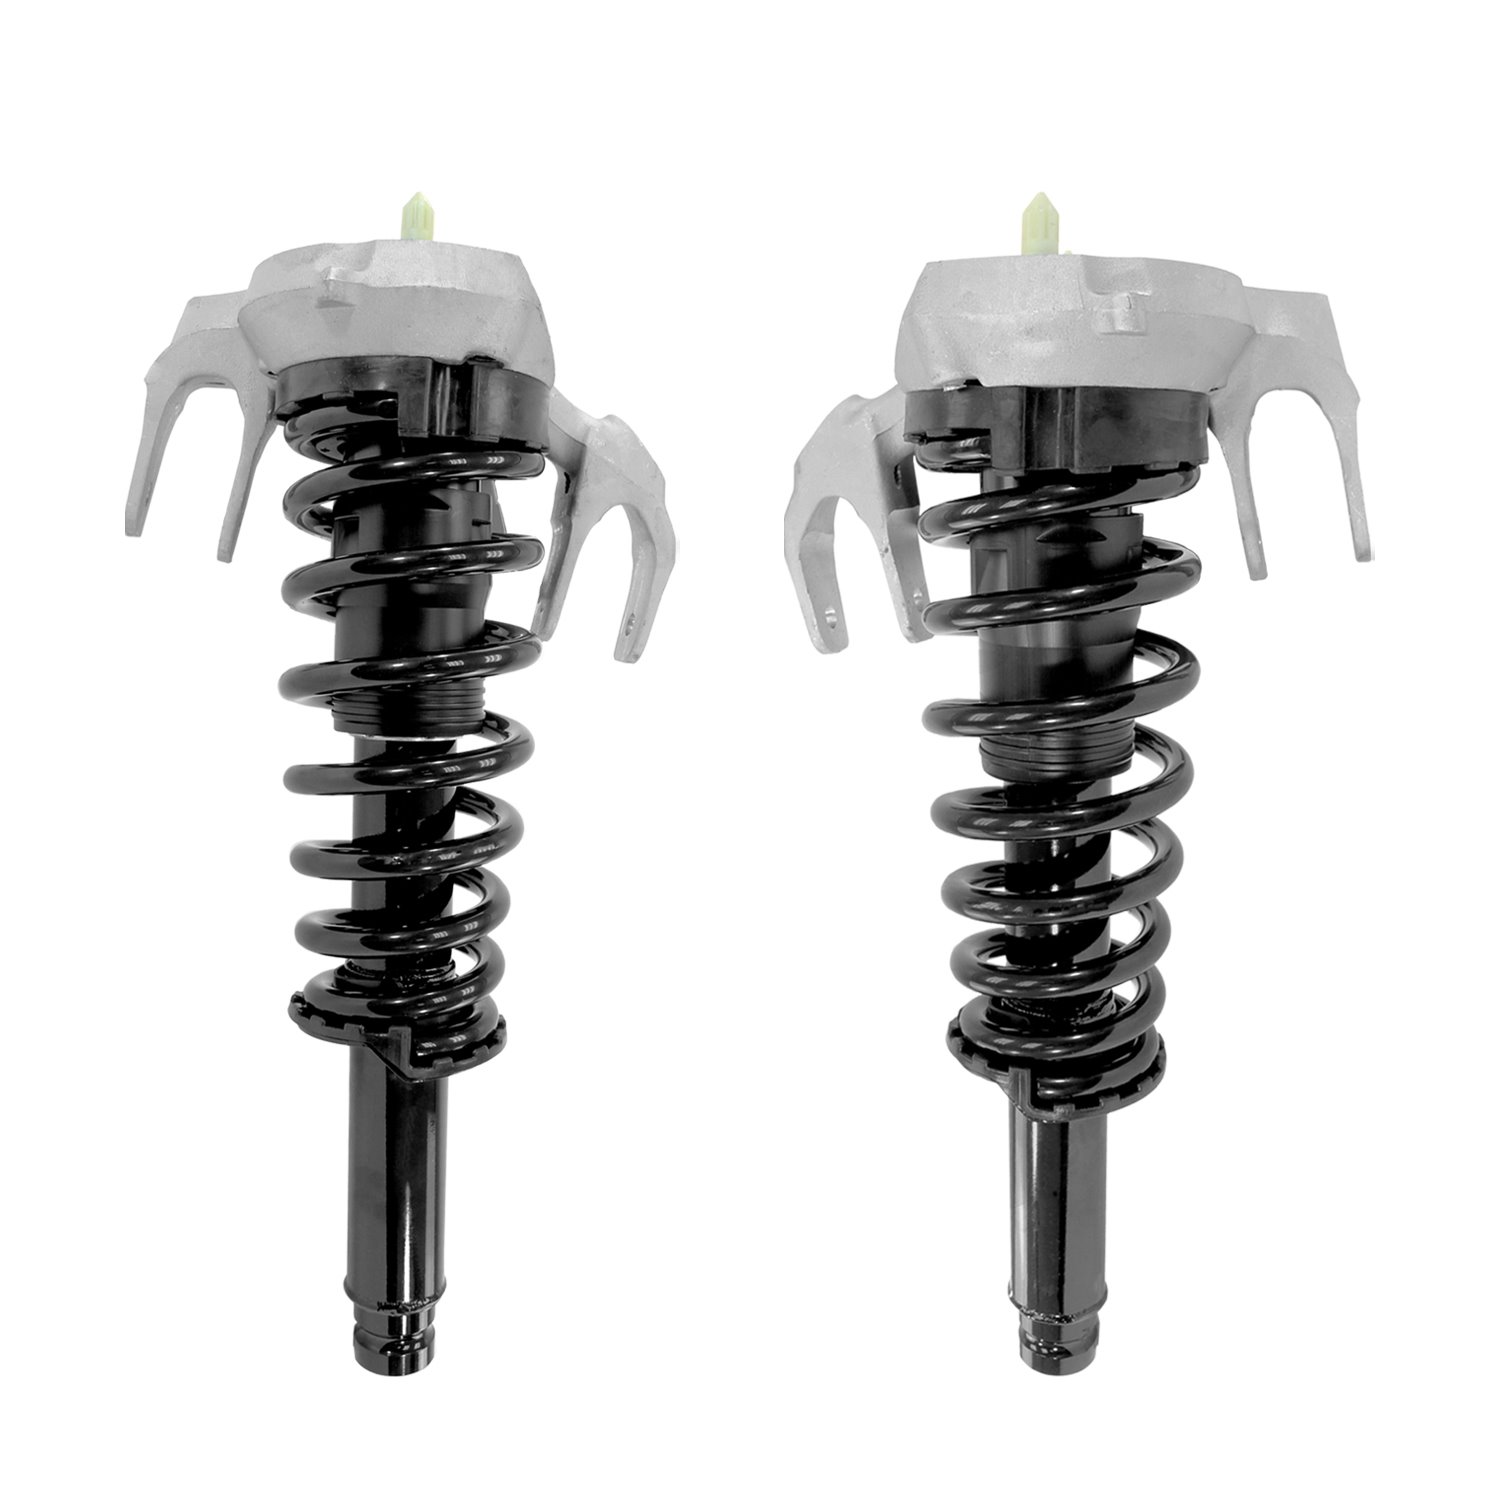 2-11707-11708-001 Front Suspension Strut & Coil Spring Assemby Set Fits Select Cadillac CTS